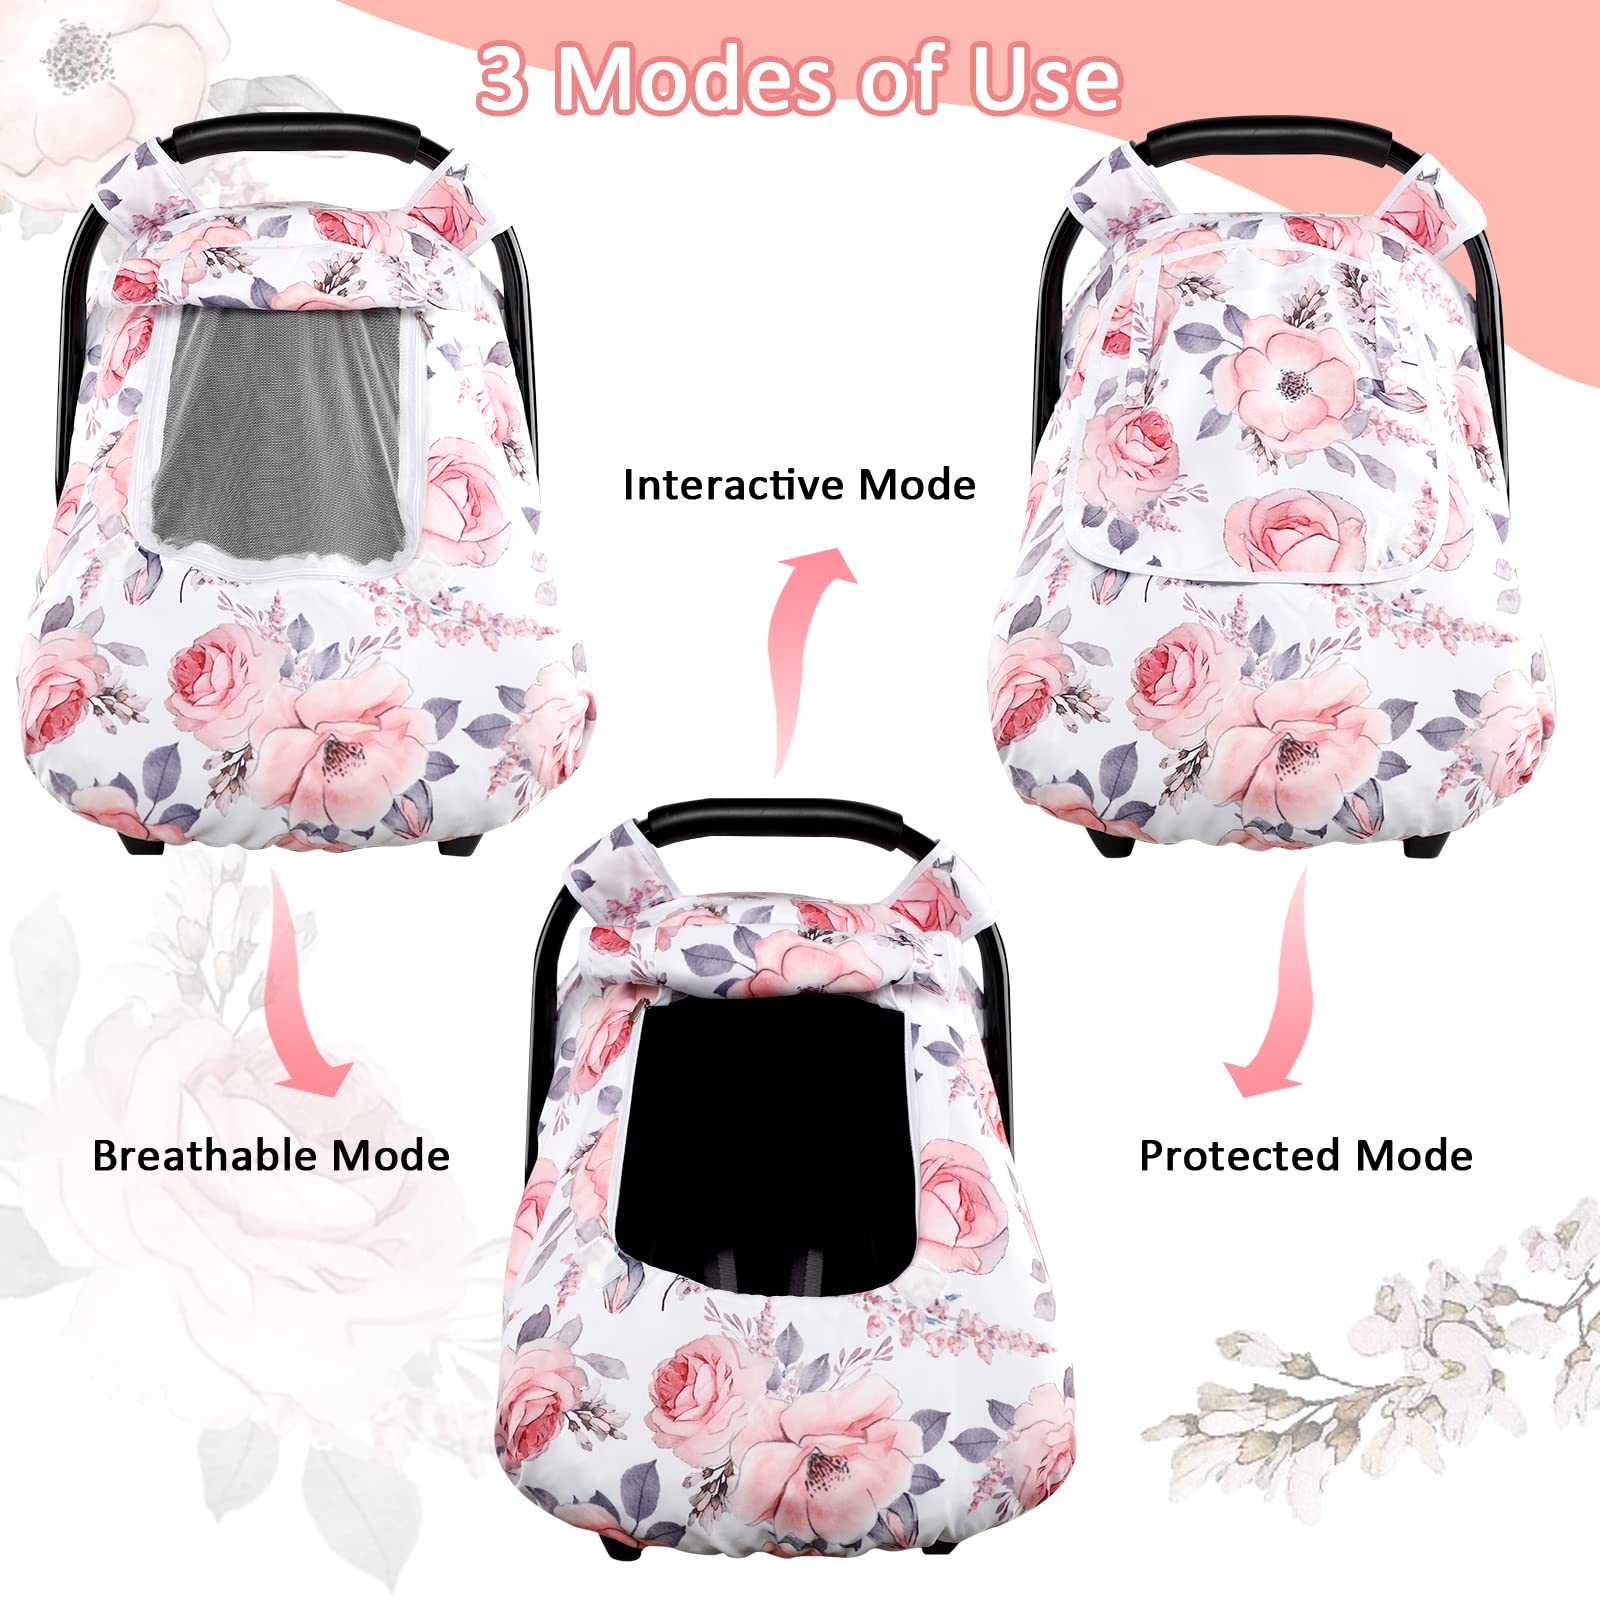 Car Seat Covers for Babies, Carseat Strap Covers, Carseat Cover Girls, Car Seat Belt Cover, Pink Floral